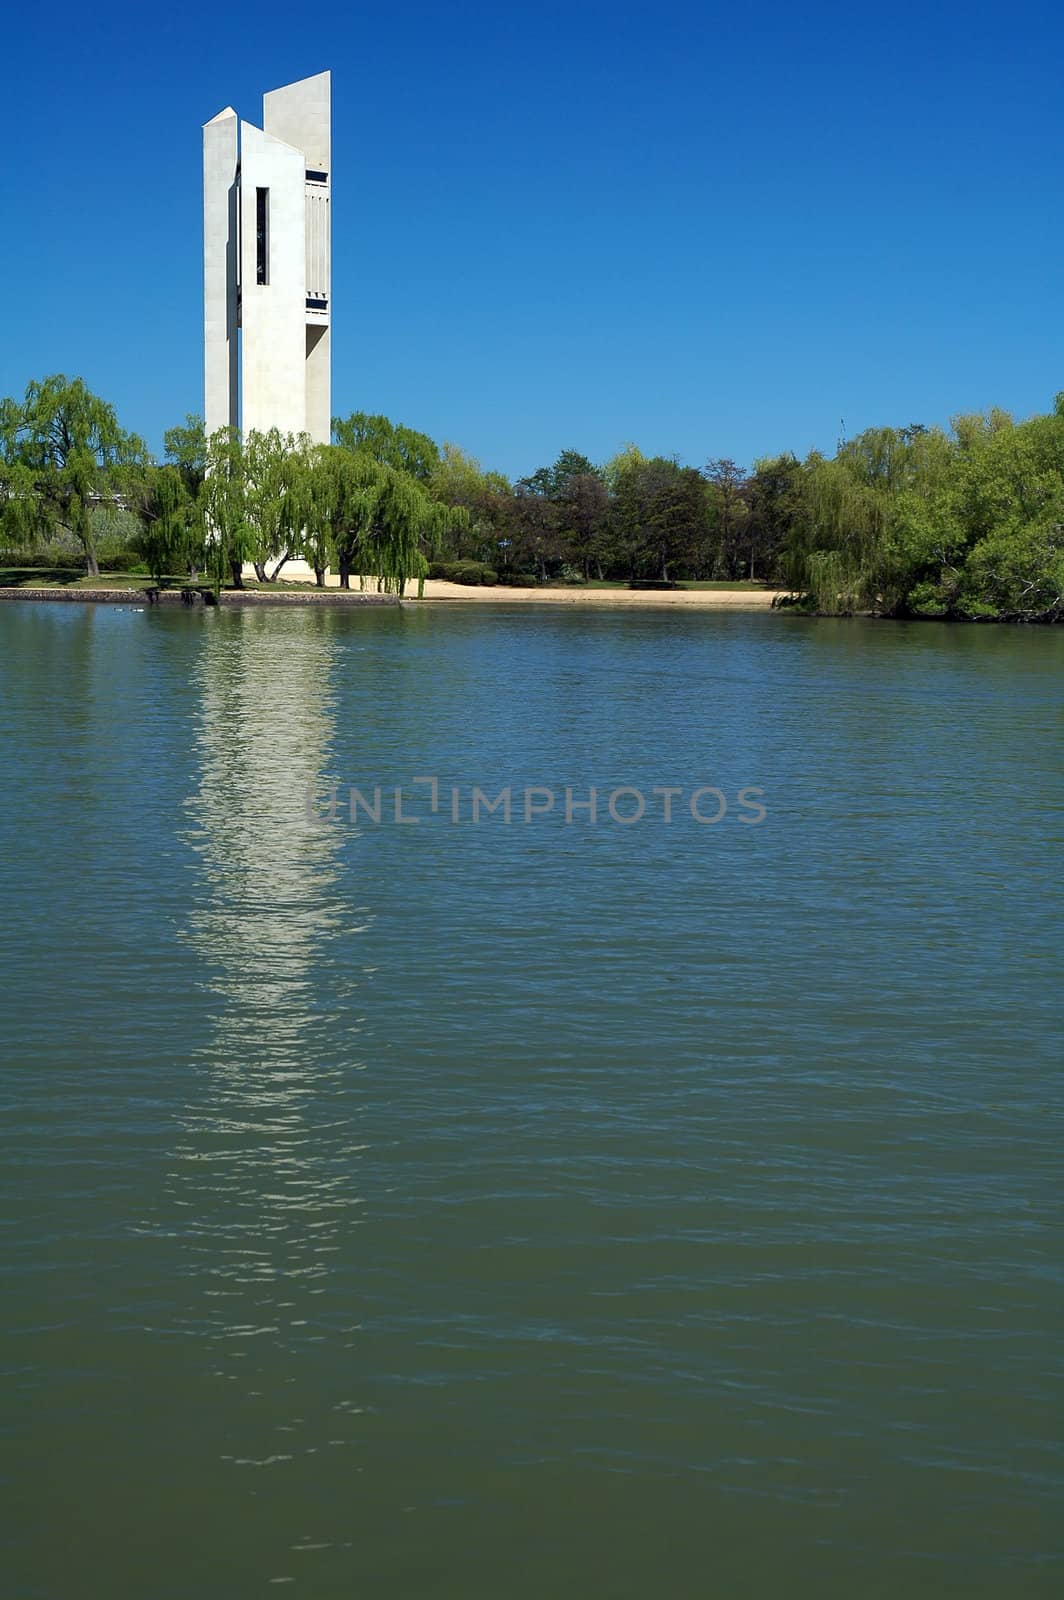 famous white Carillion in Canberra, lake with boat in foreground